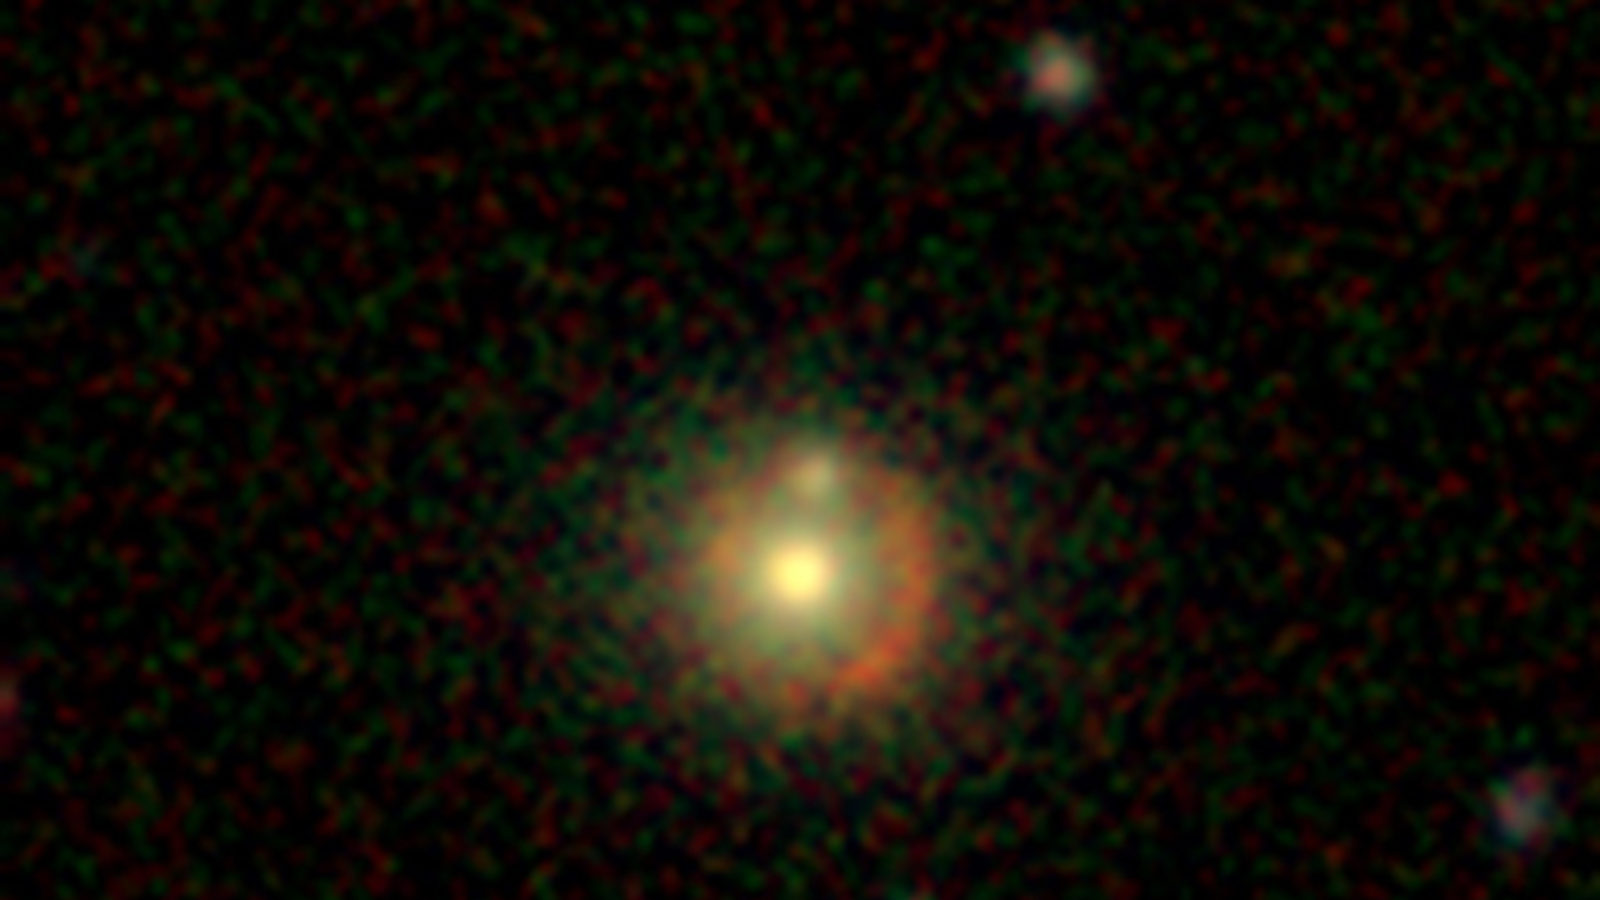 This lensed galaxy was discovered by citizen scientists earlier this week through the Space Warps website